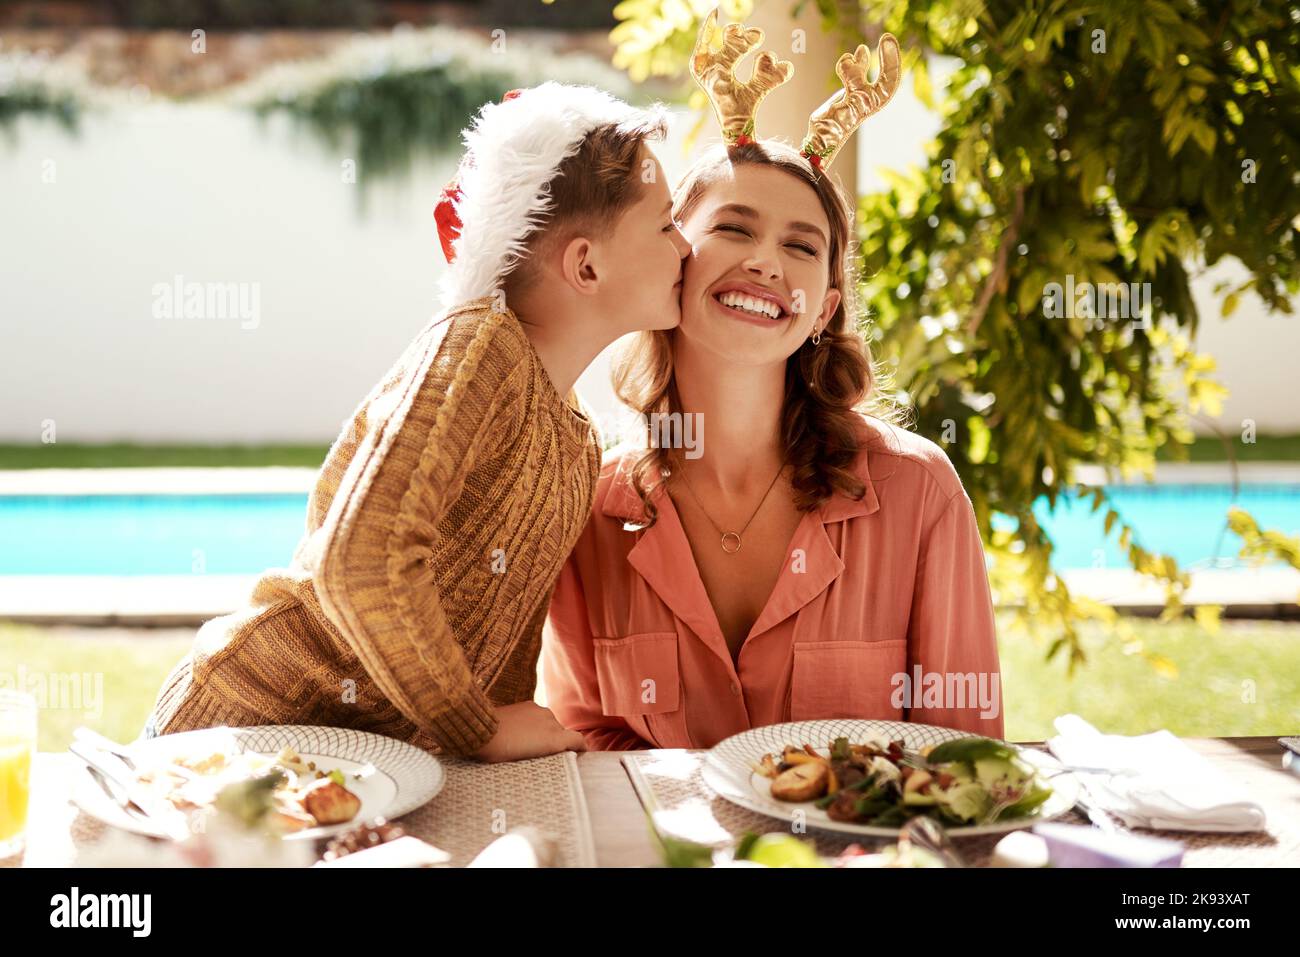 Christmas is all about appreciating your blessings. a girl girl and her mother enjoying Christmas lunch together. Stock Photo